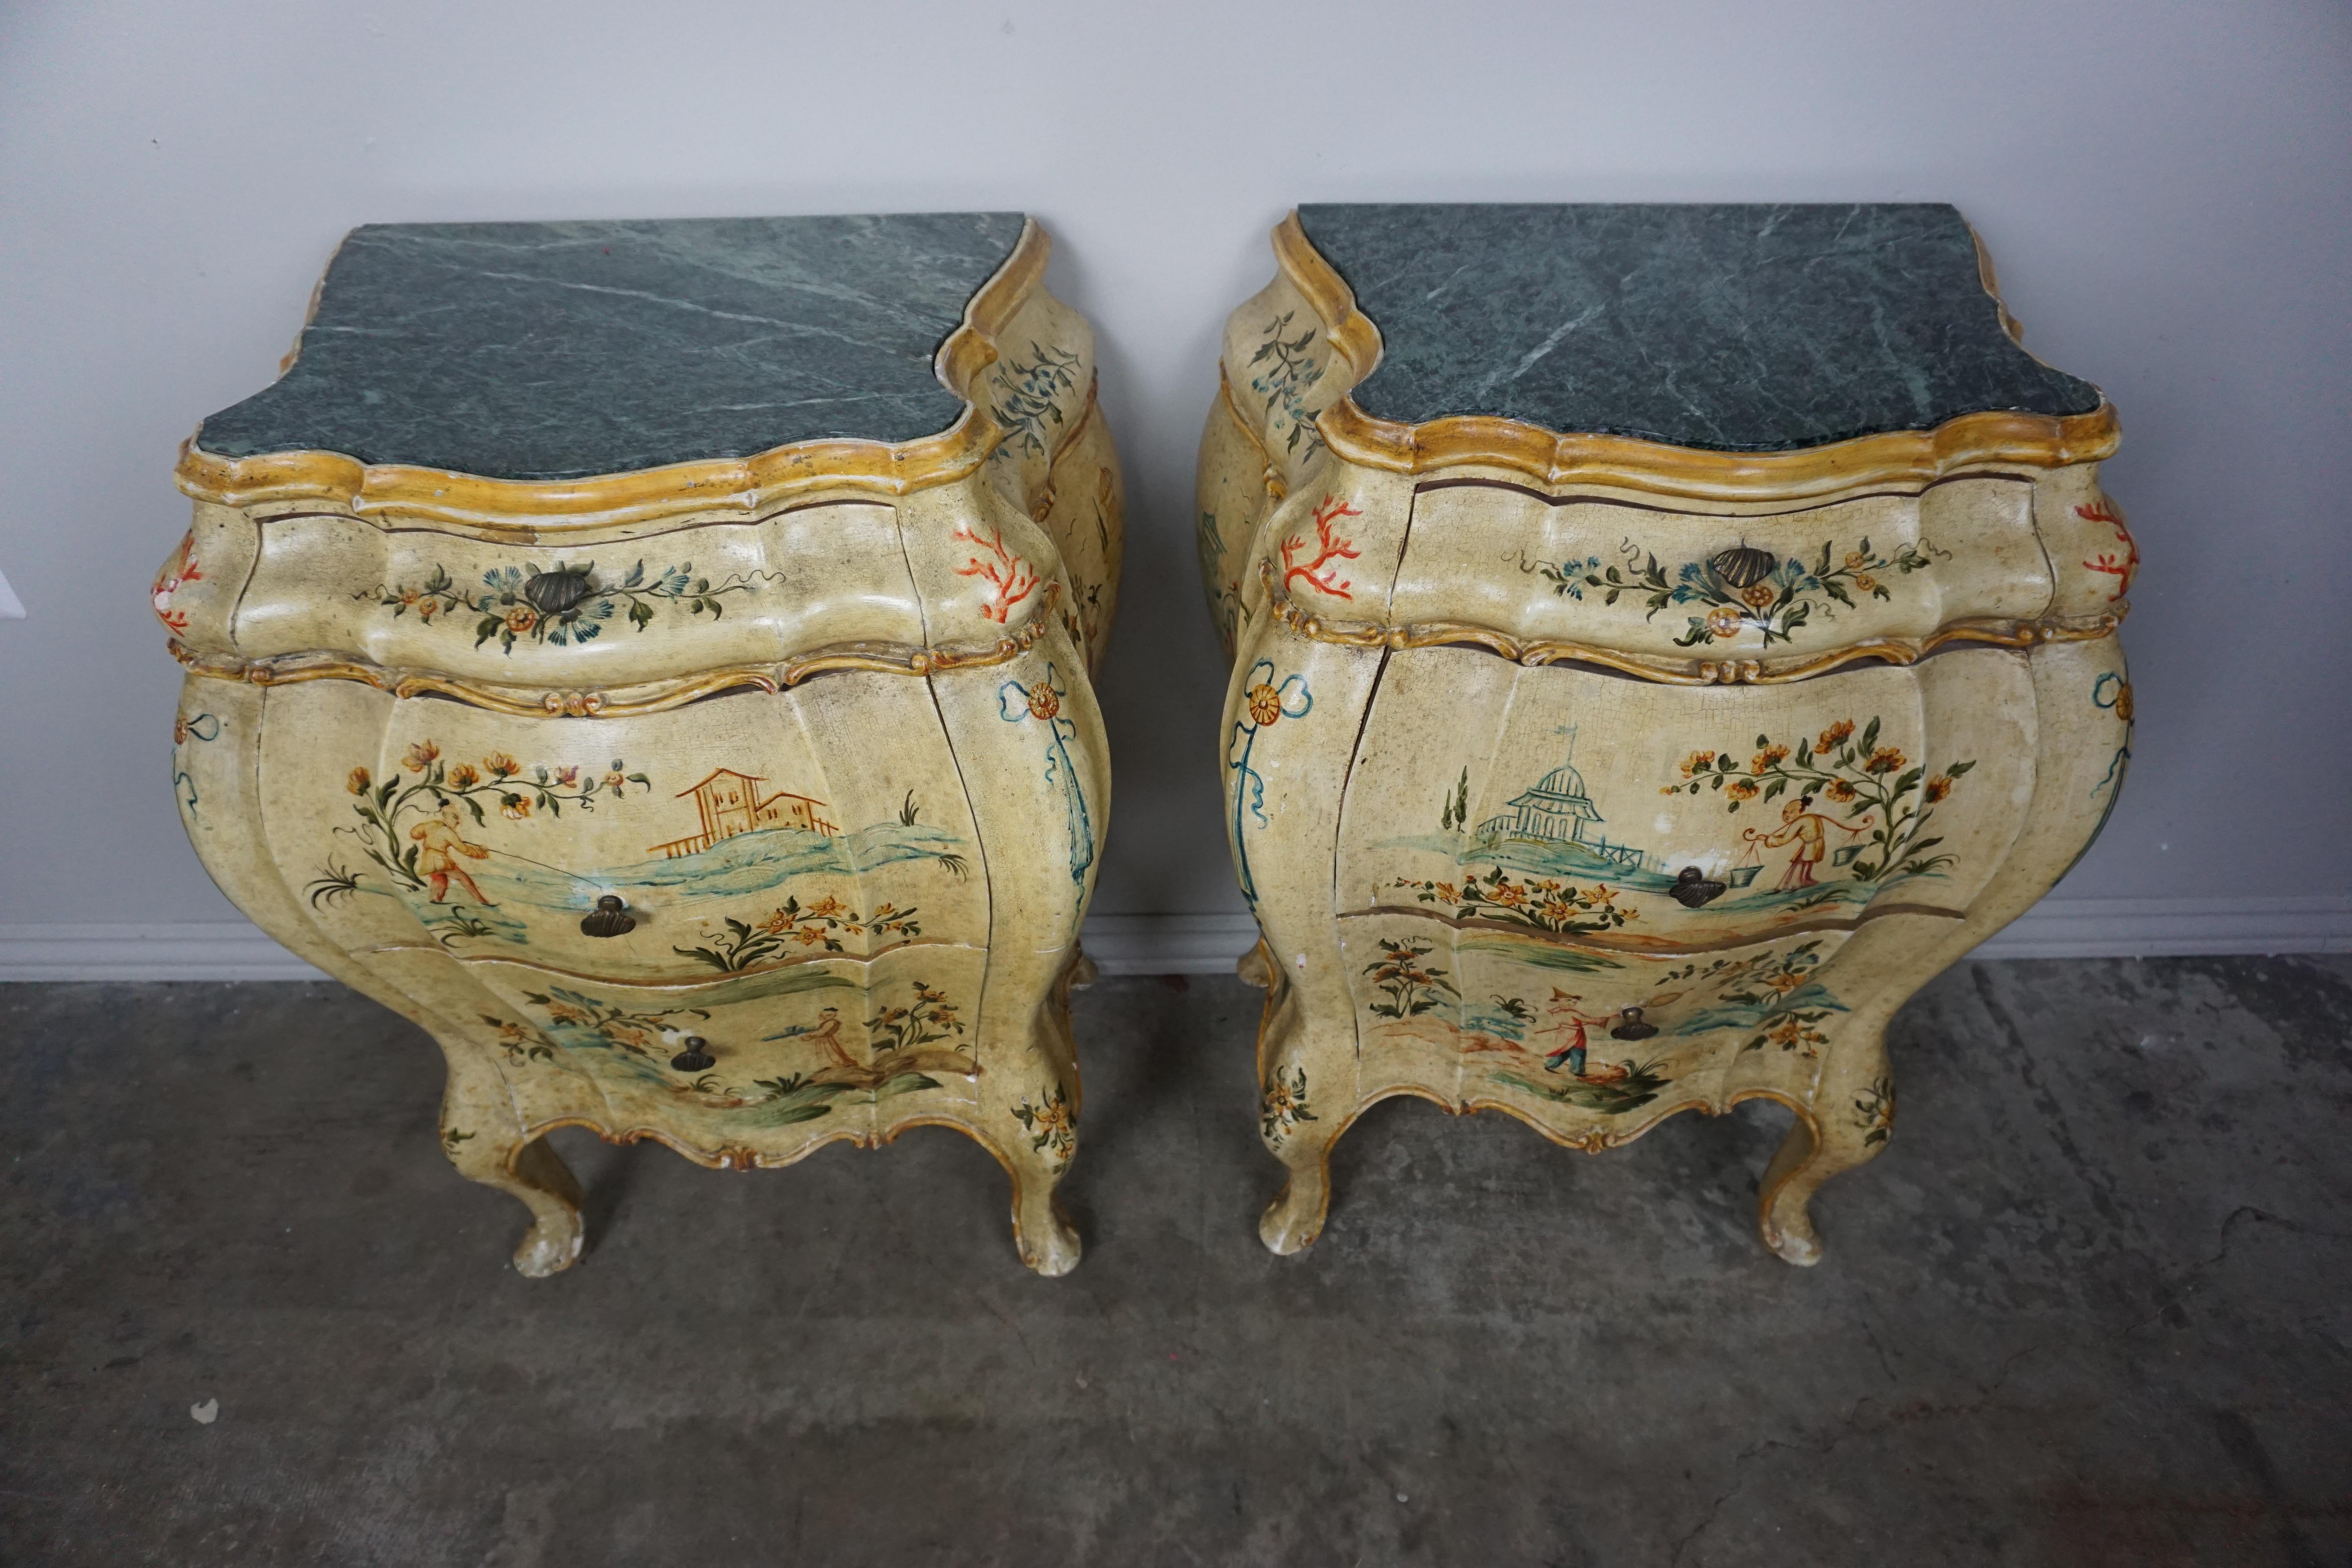 Pair of Italian hand painted chinoiserie chests with three drawers each. Detailed raised chinoiserie painted scenes throughout. Green marble inset tops. The bedside tables stand on cabriole shaped legs that end in a pad style foot.